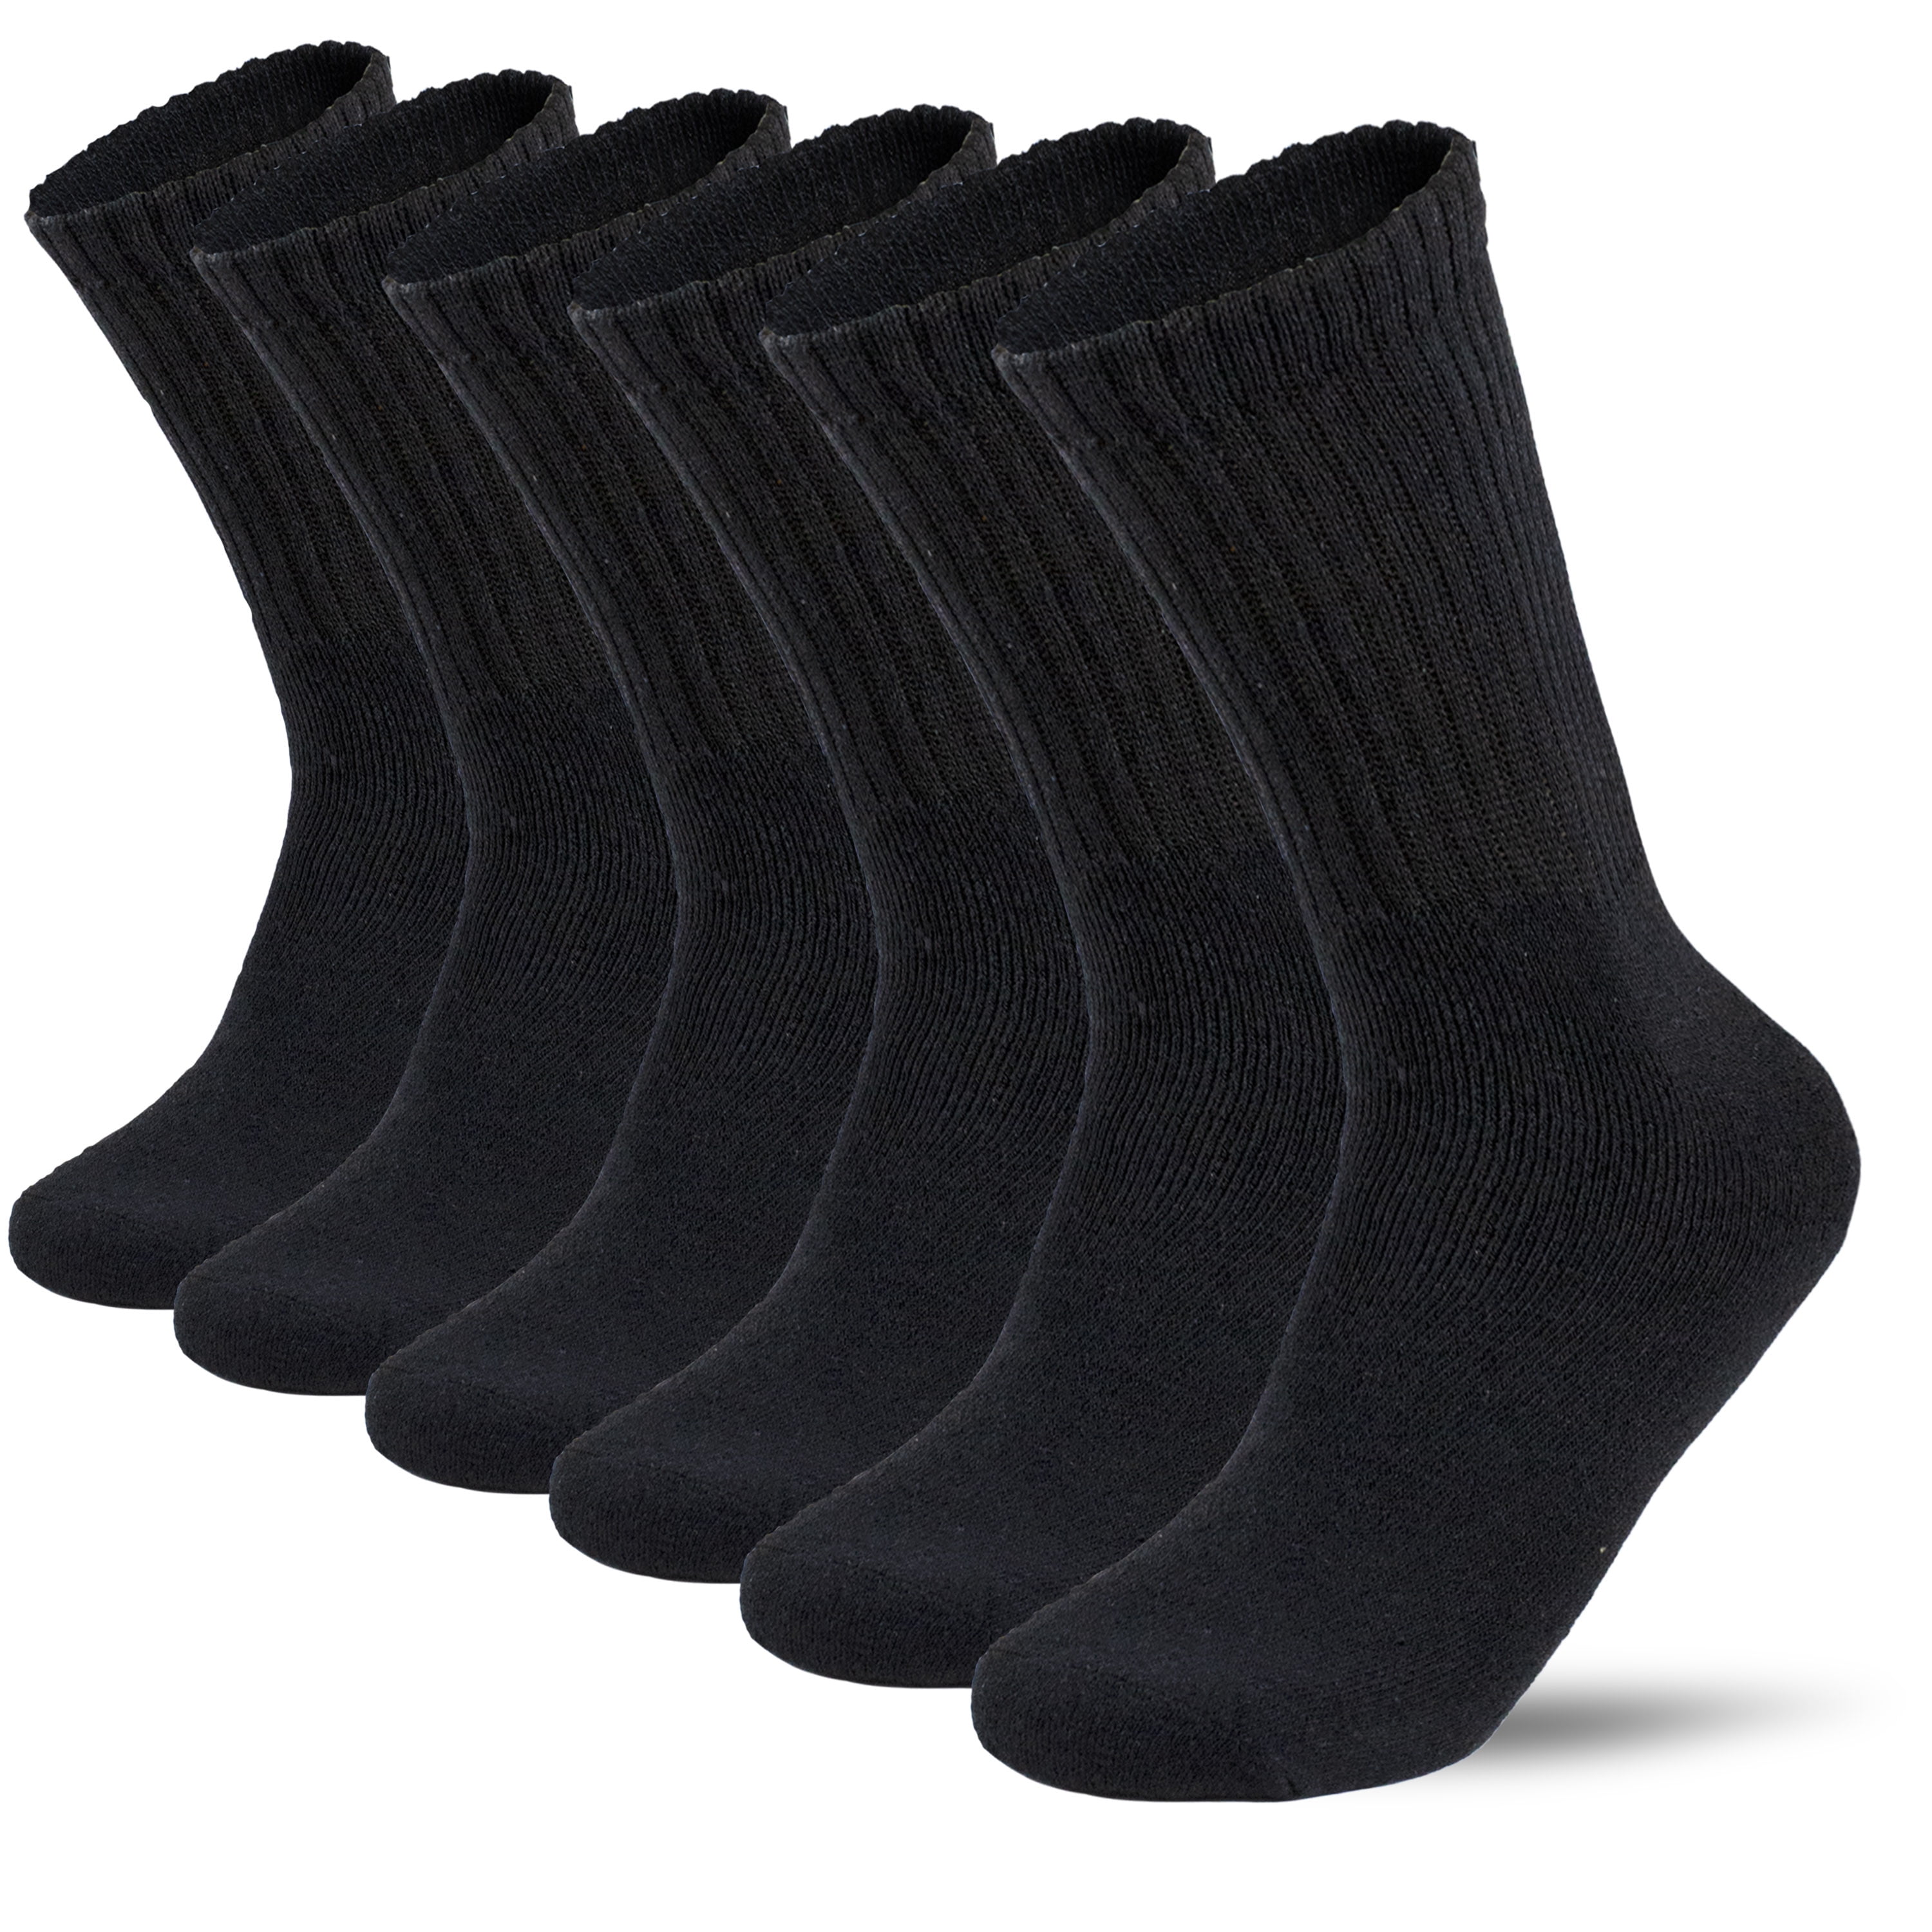 6 Pairs Men's Athletic Cotton Casual Crew Solid Sport Socks Black Size ...